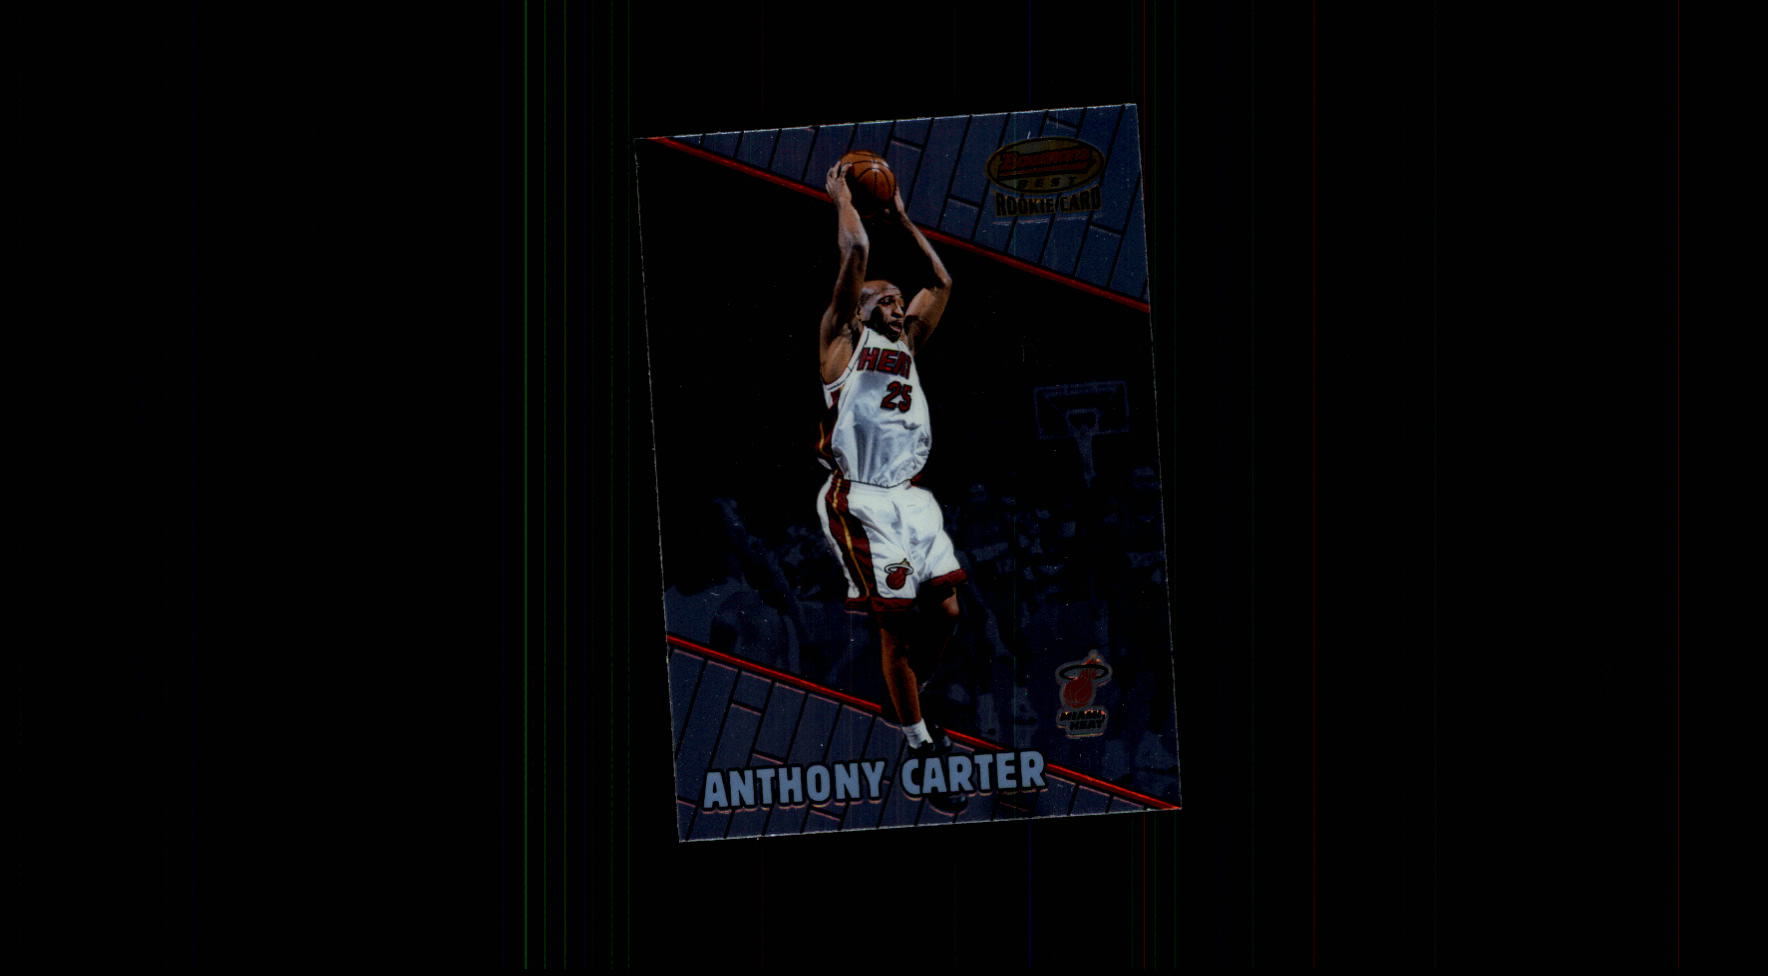  Anthony Carter player image